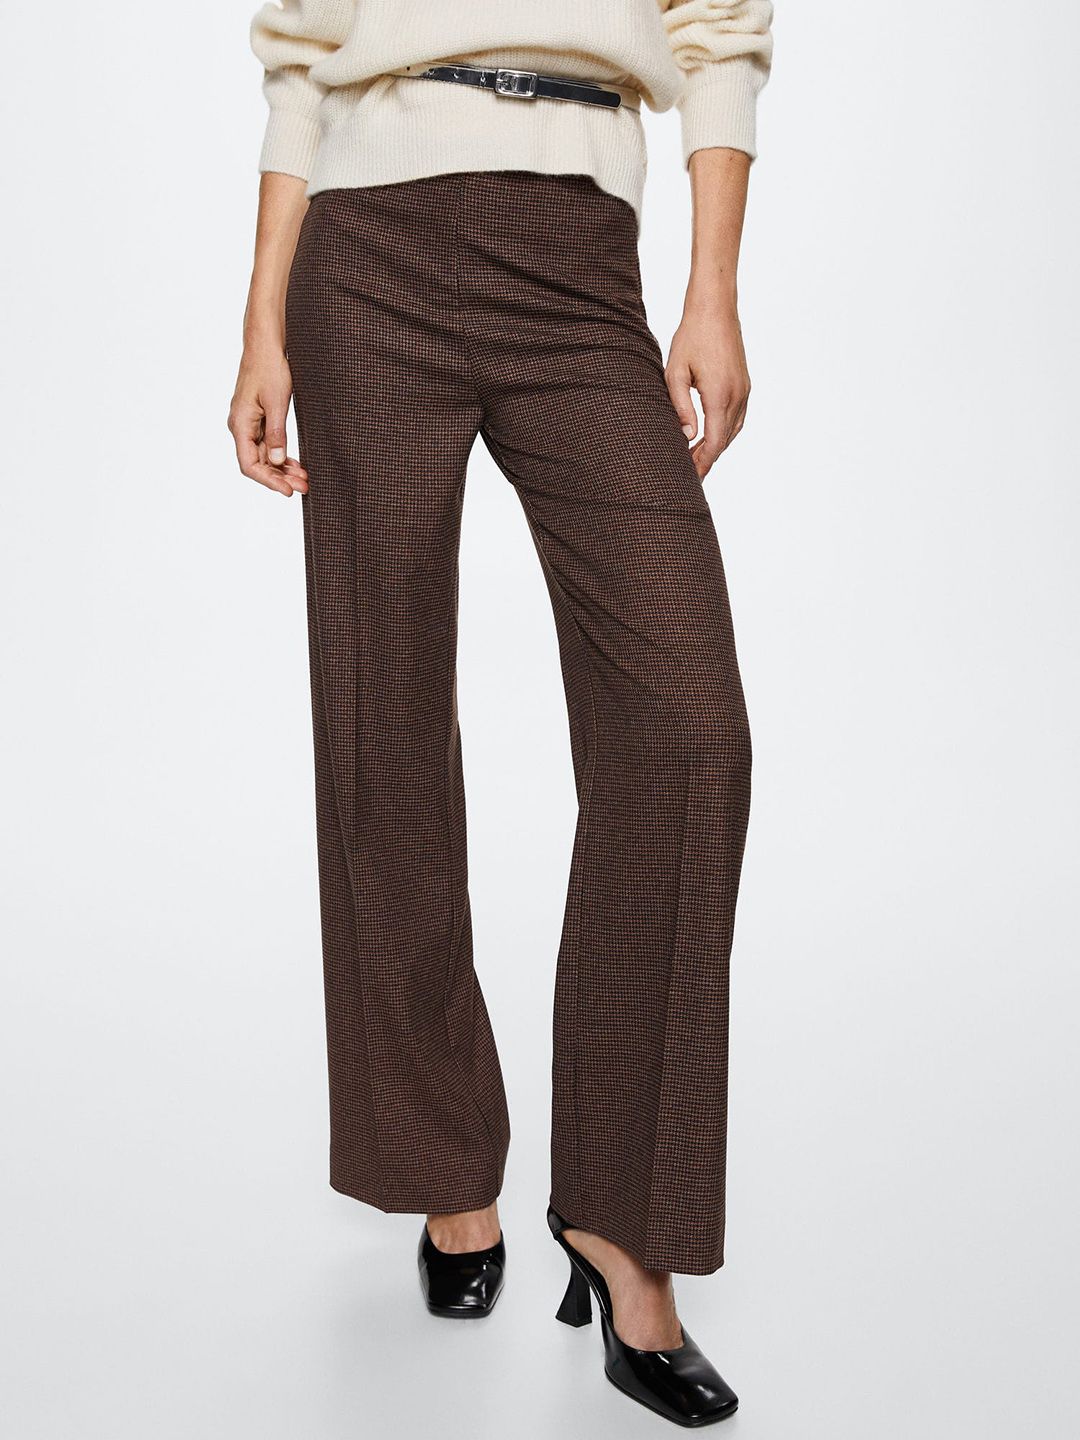 MANGO Women Brown Houndstooth Patterned High-Rise Parallel Trousers Price in India